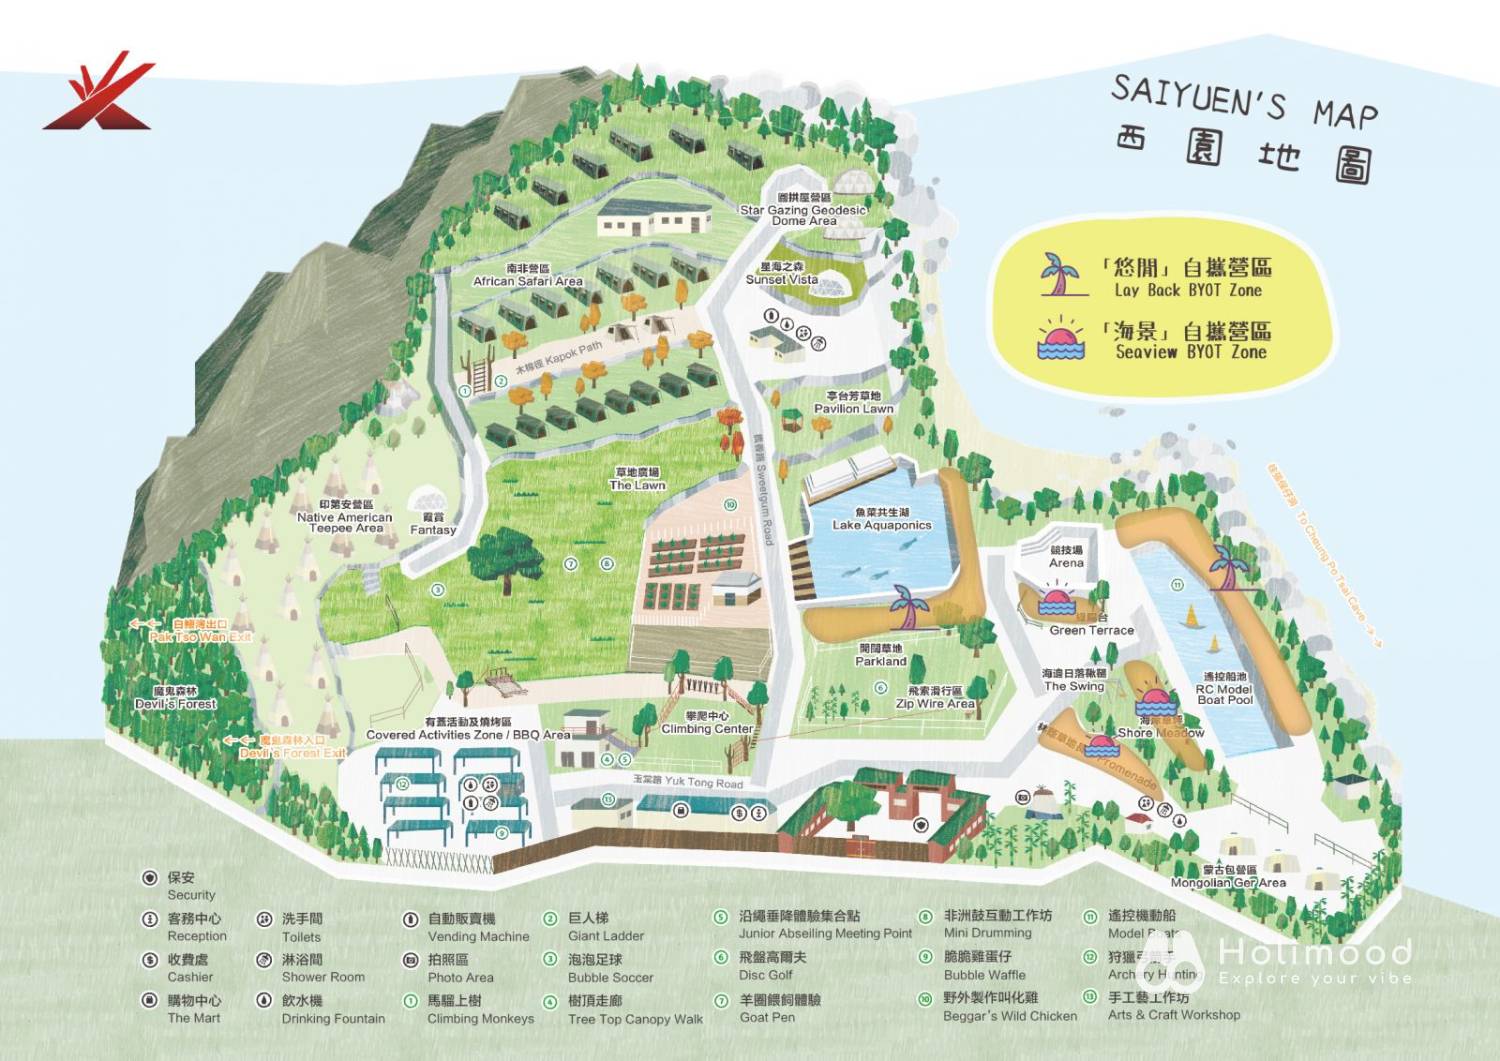 Sai Yuen Camping Adventure Park - Cheung Chau Campsite Seaview BYOT (Bring Your Own Tent) Zone 6